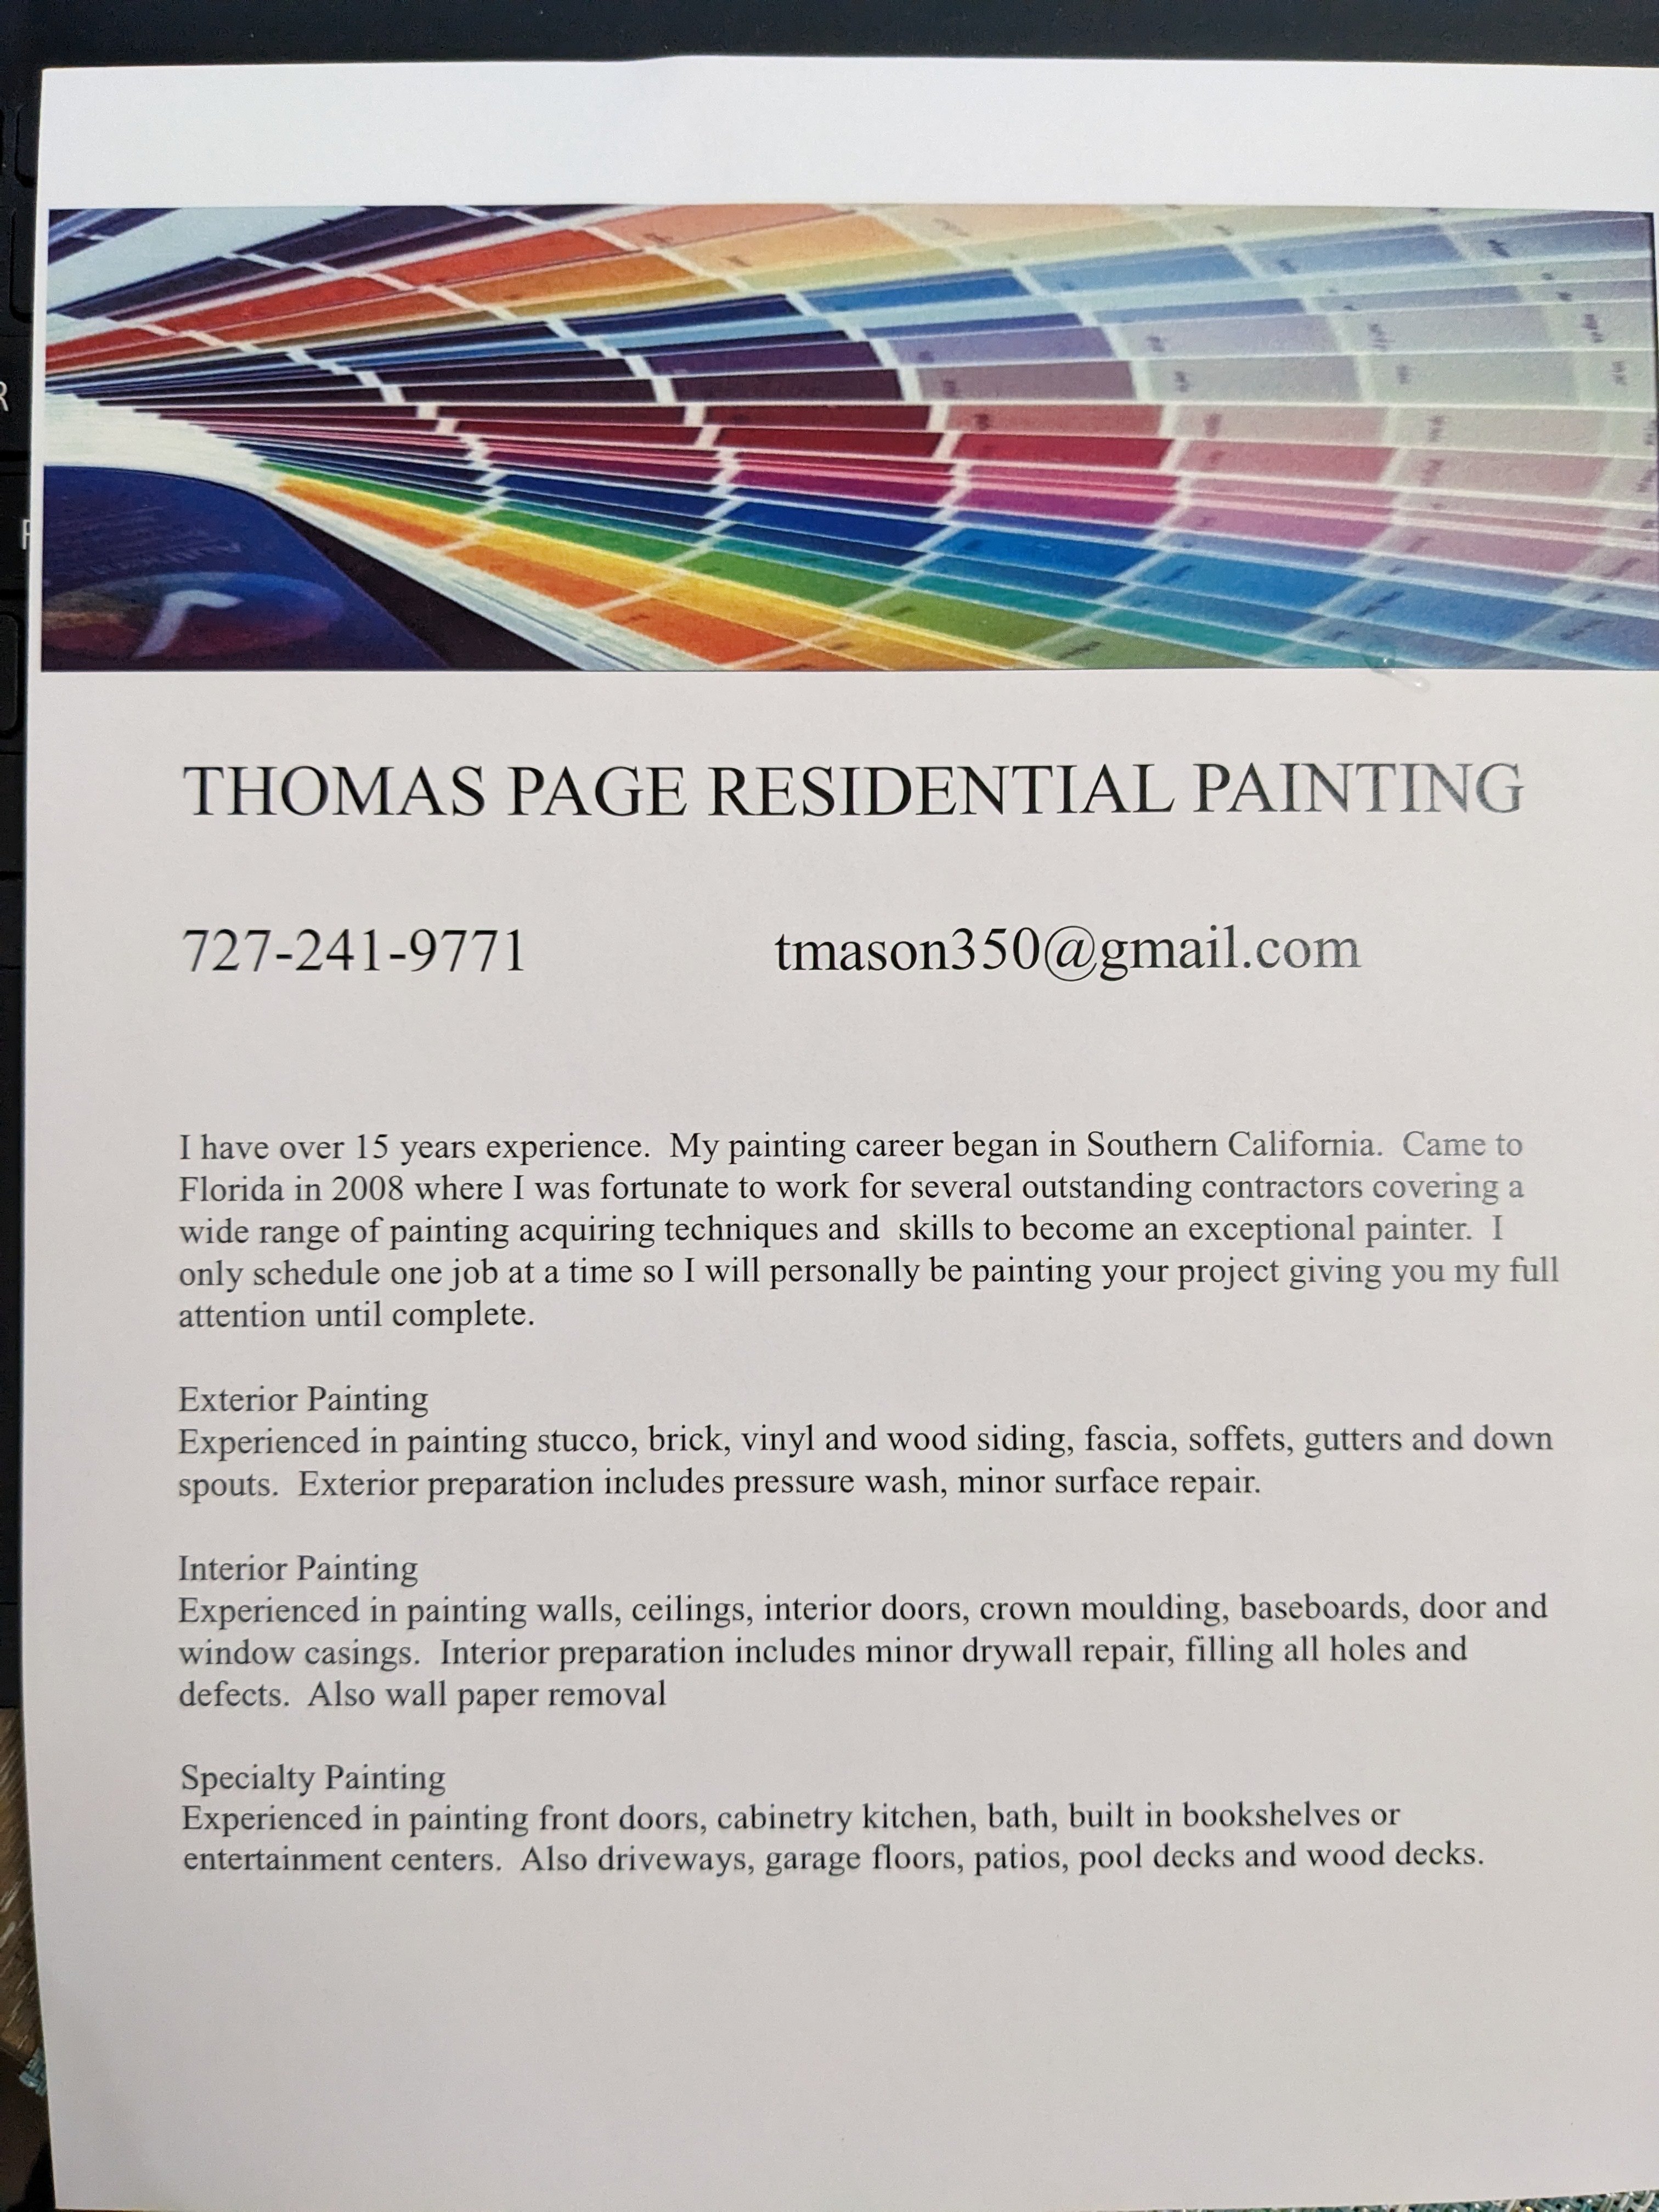 Thomas Page Residential Painting Logo